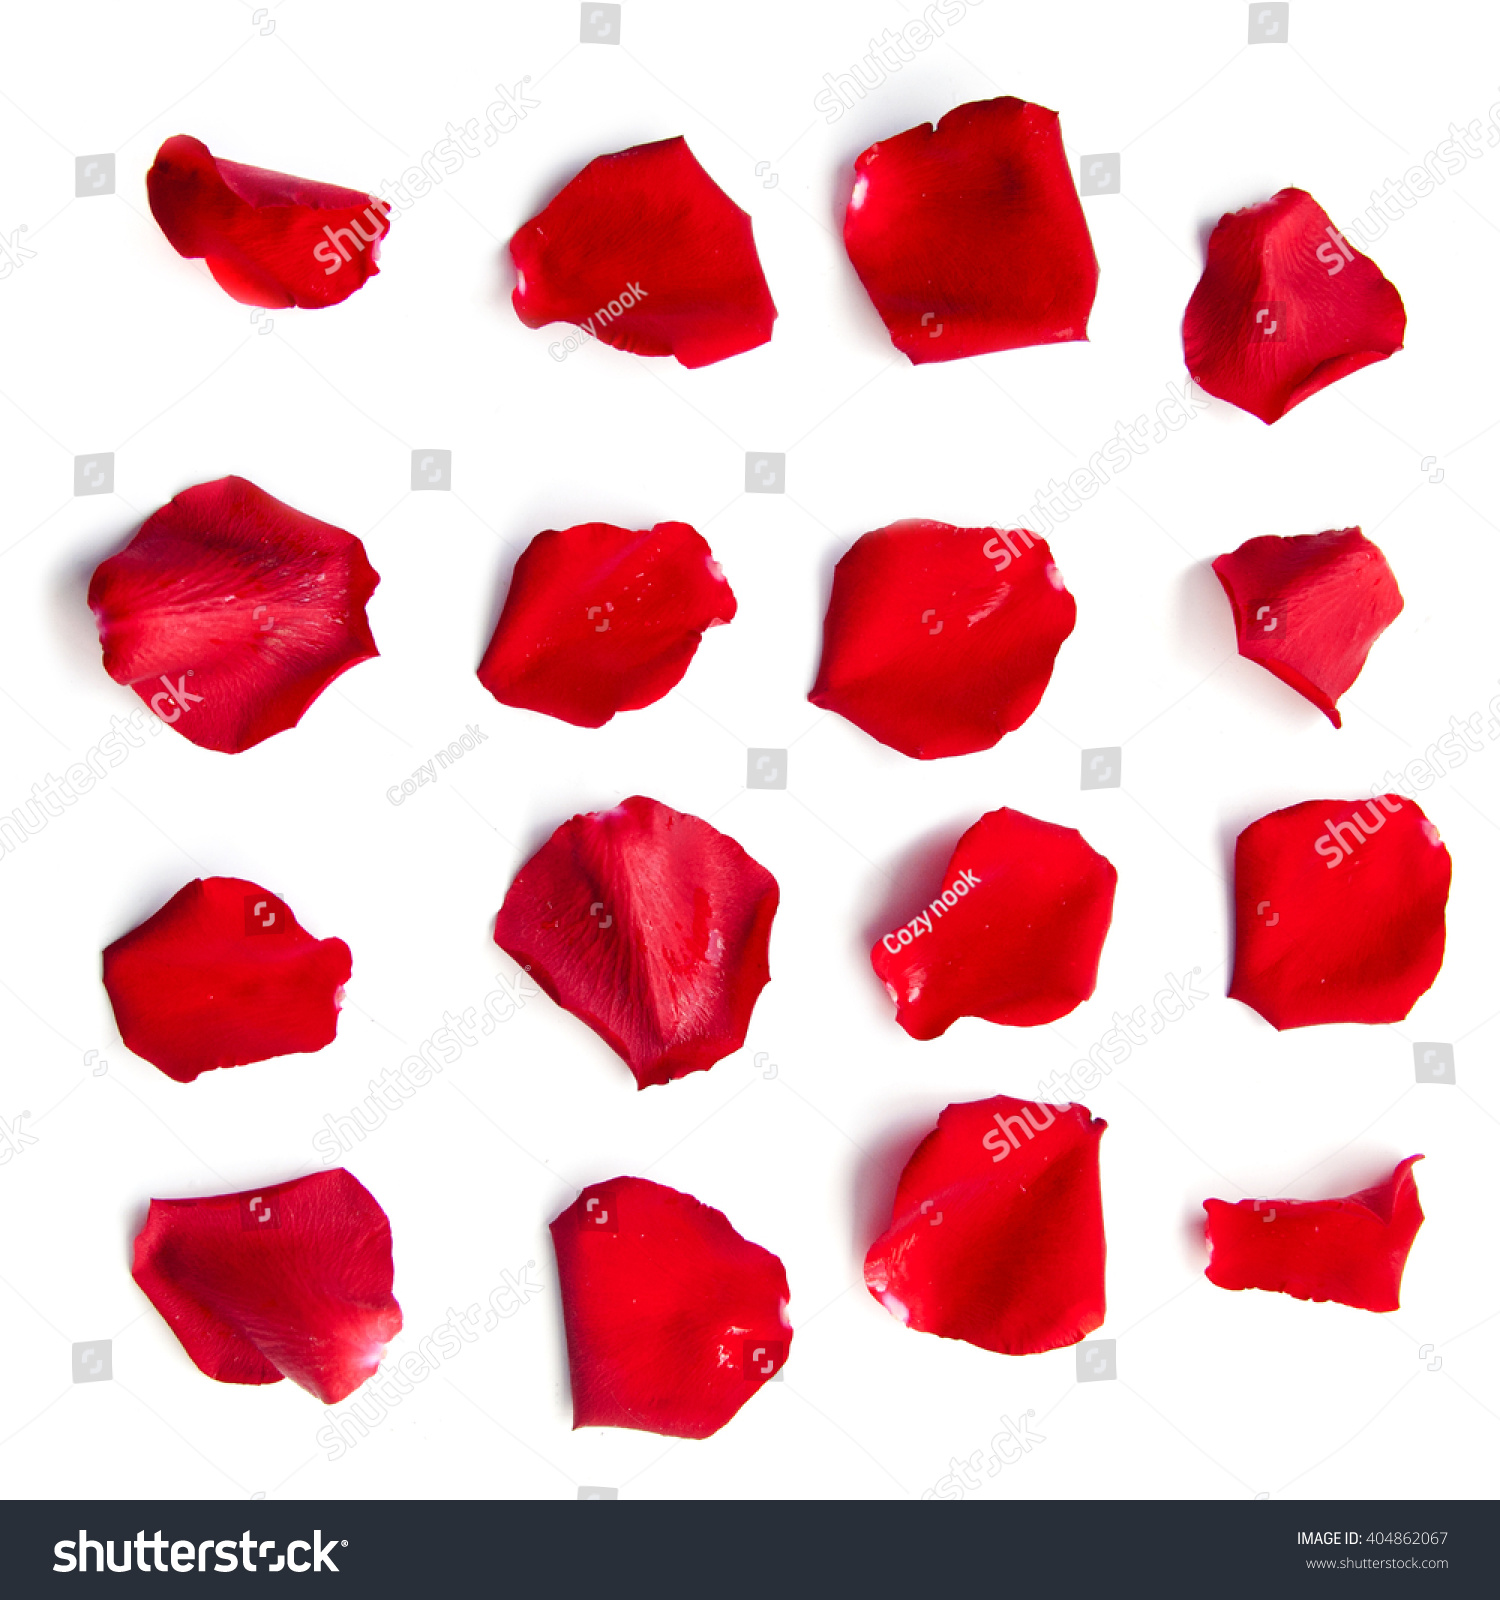 Set of 16 red rose petals on white background #404862067